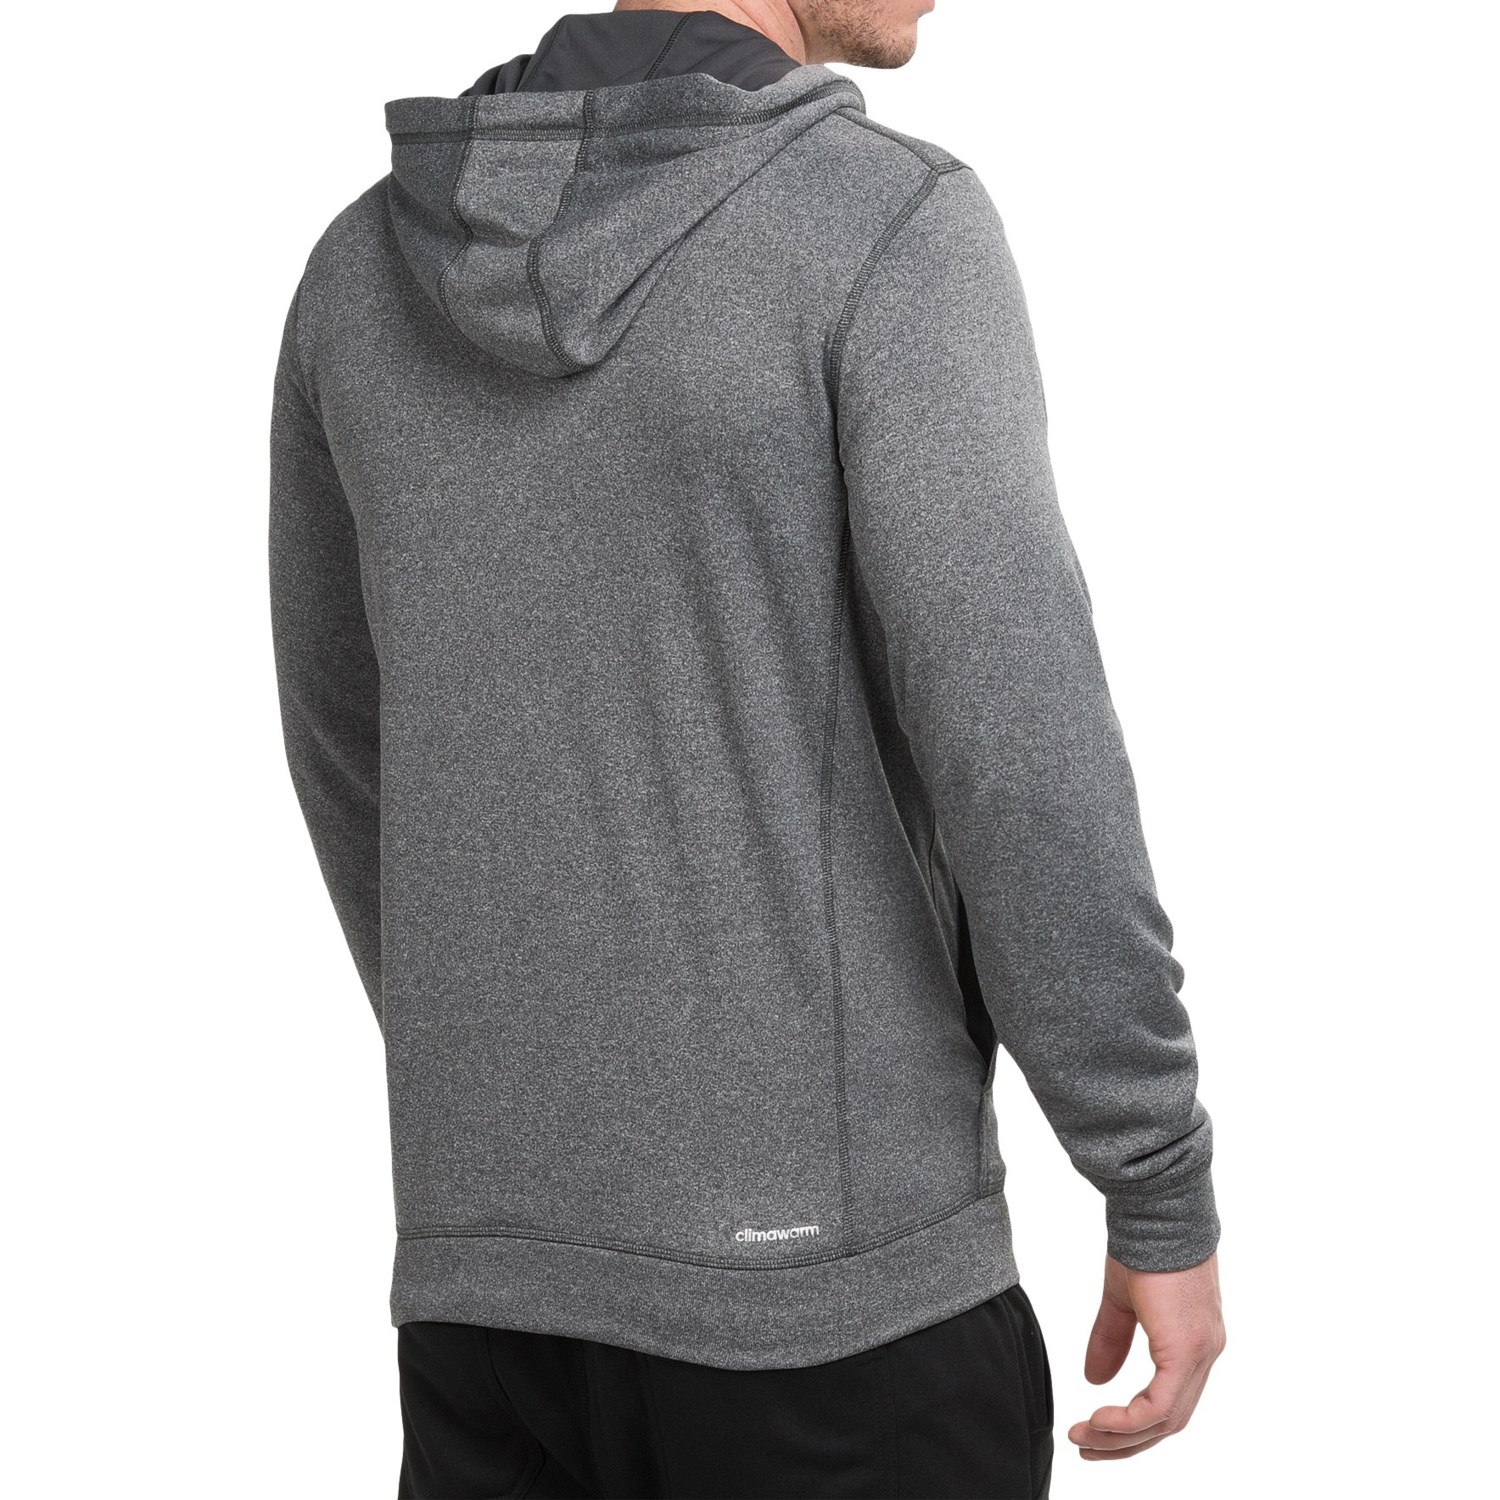 adidas outdoor Climawarm® Ultimate Full Zip Hoodie (For Men) - Save 41%